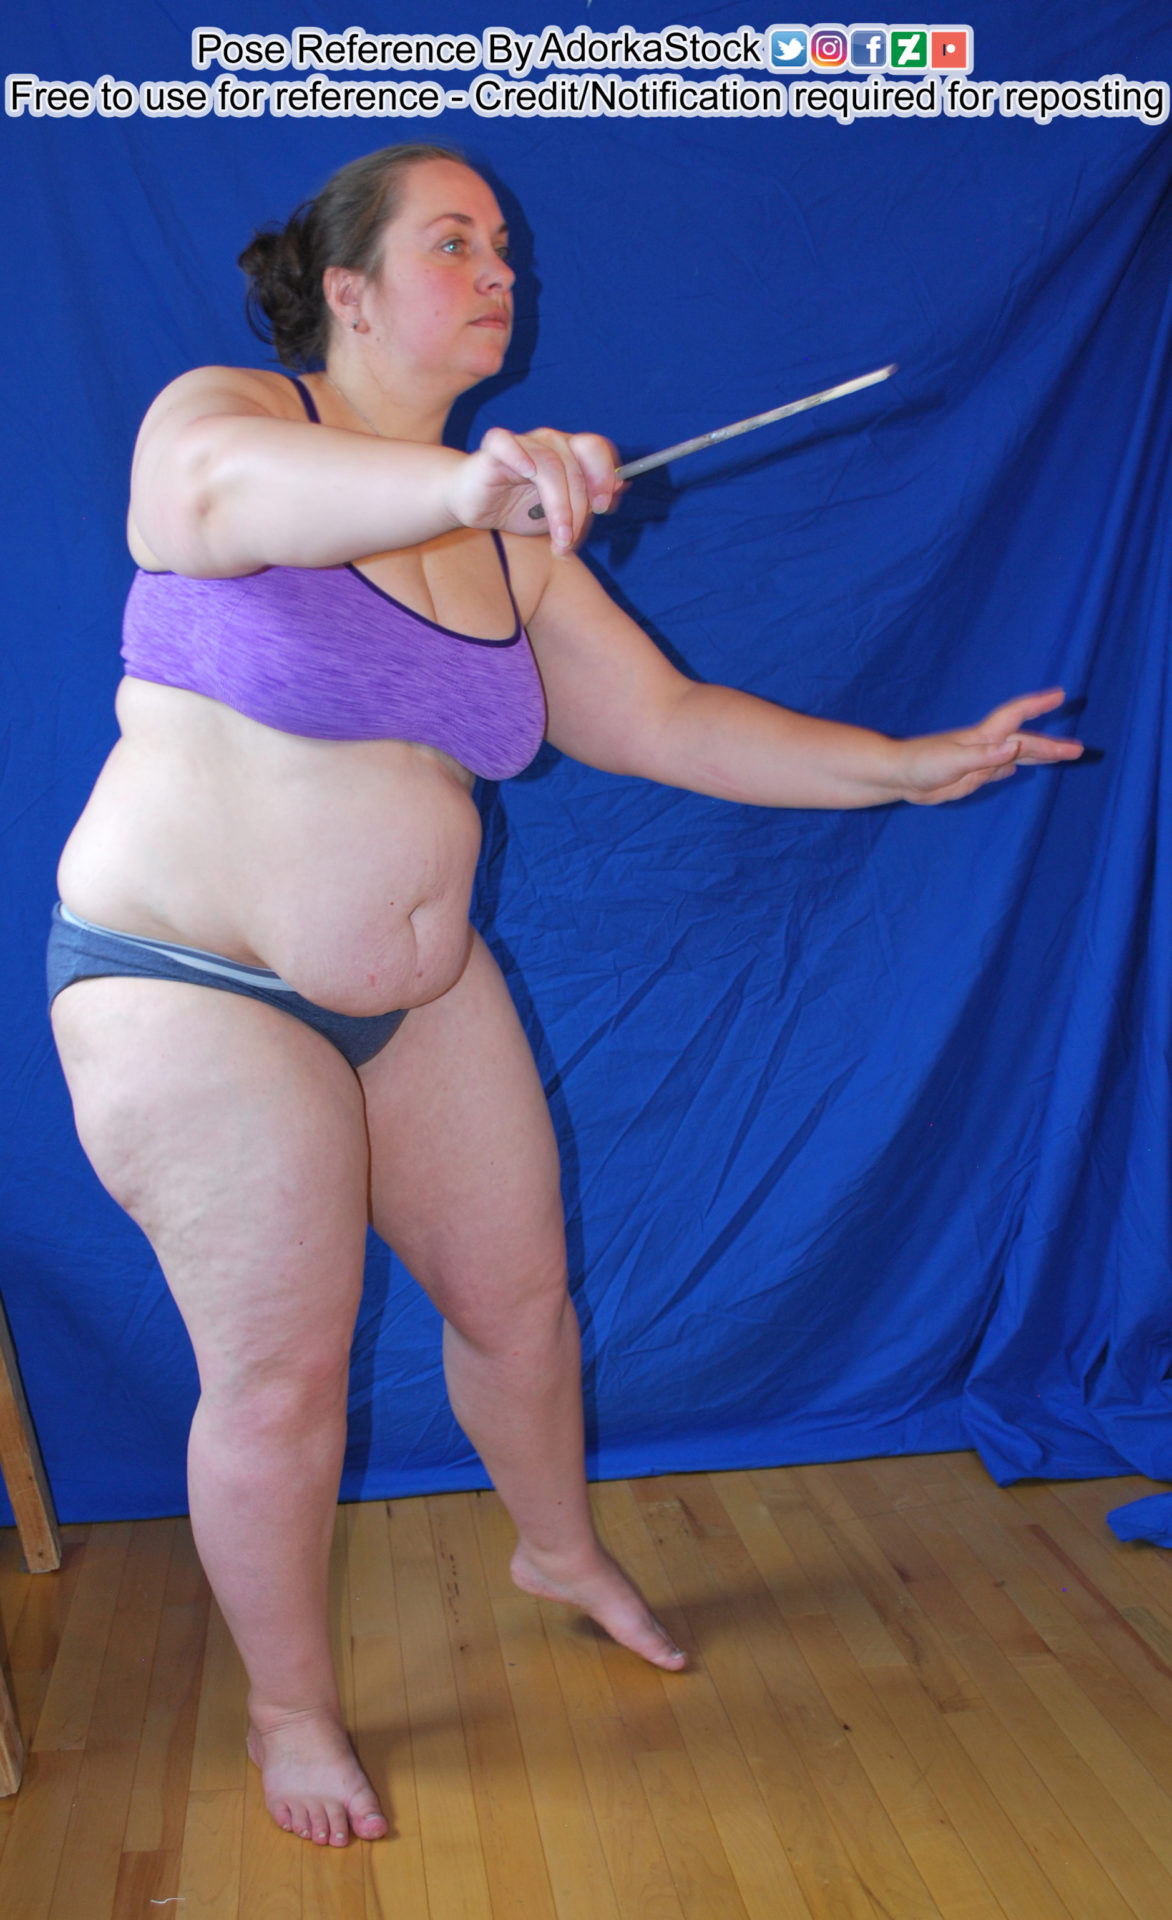 fat, white, female pose reference model with a wand as if conducting music or casting a spell